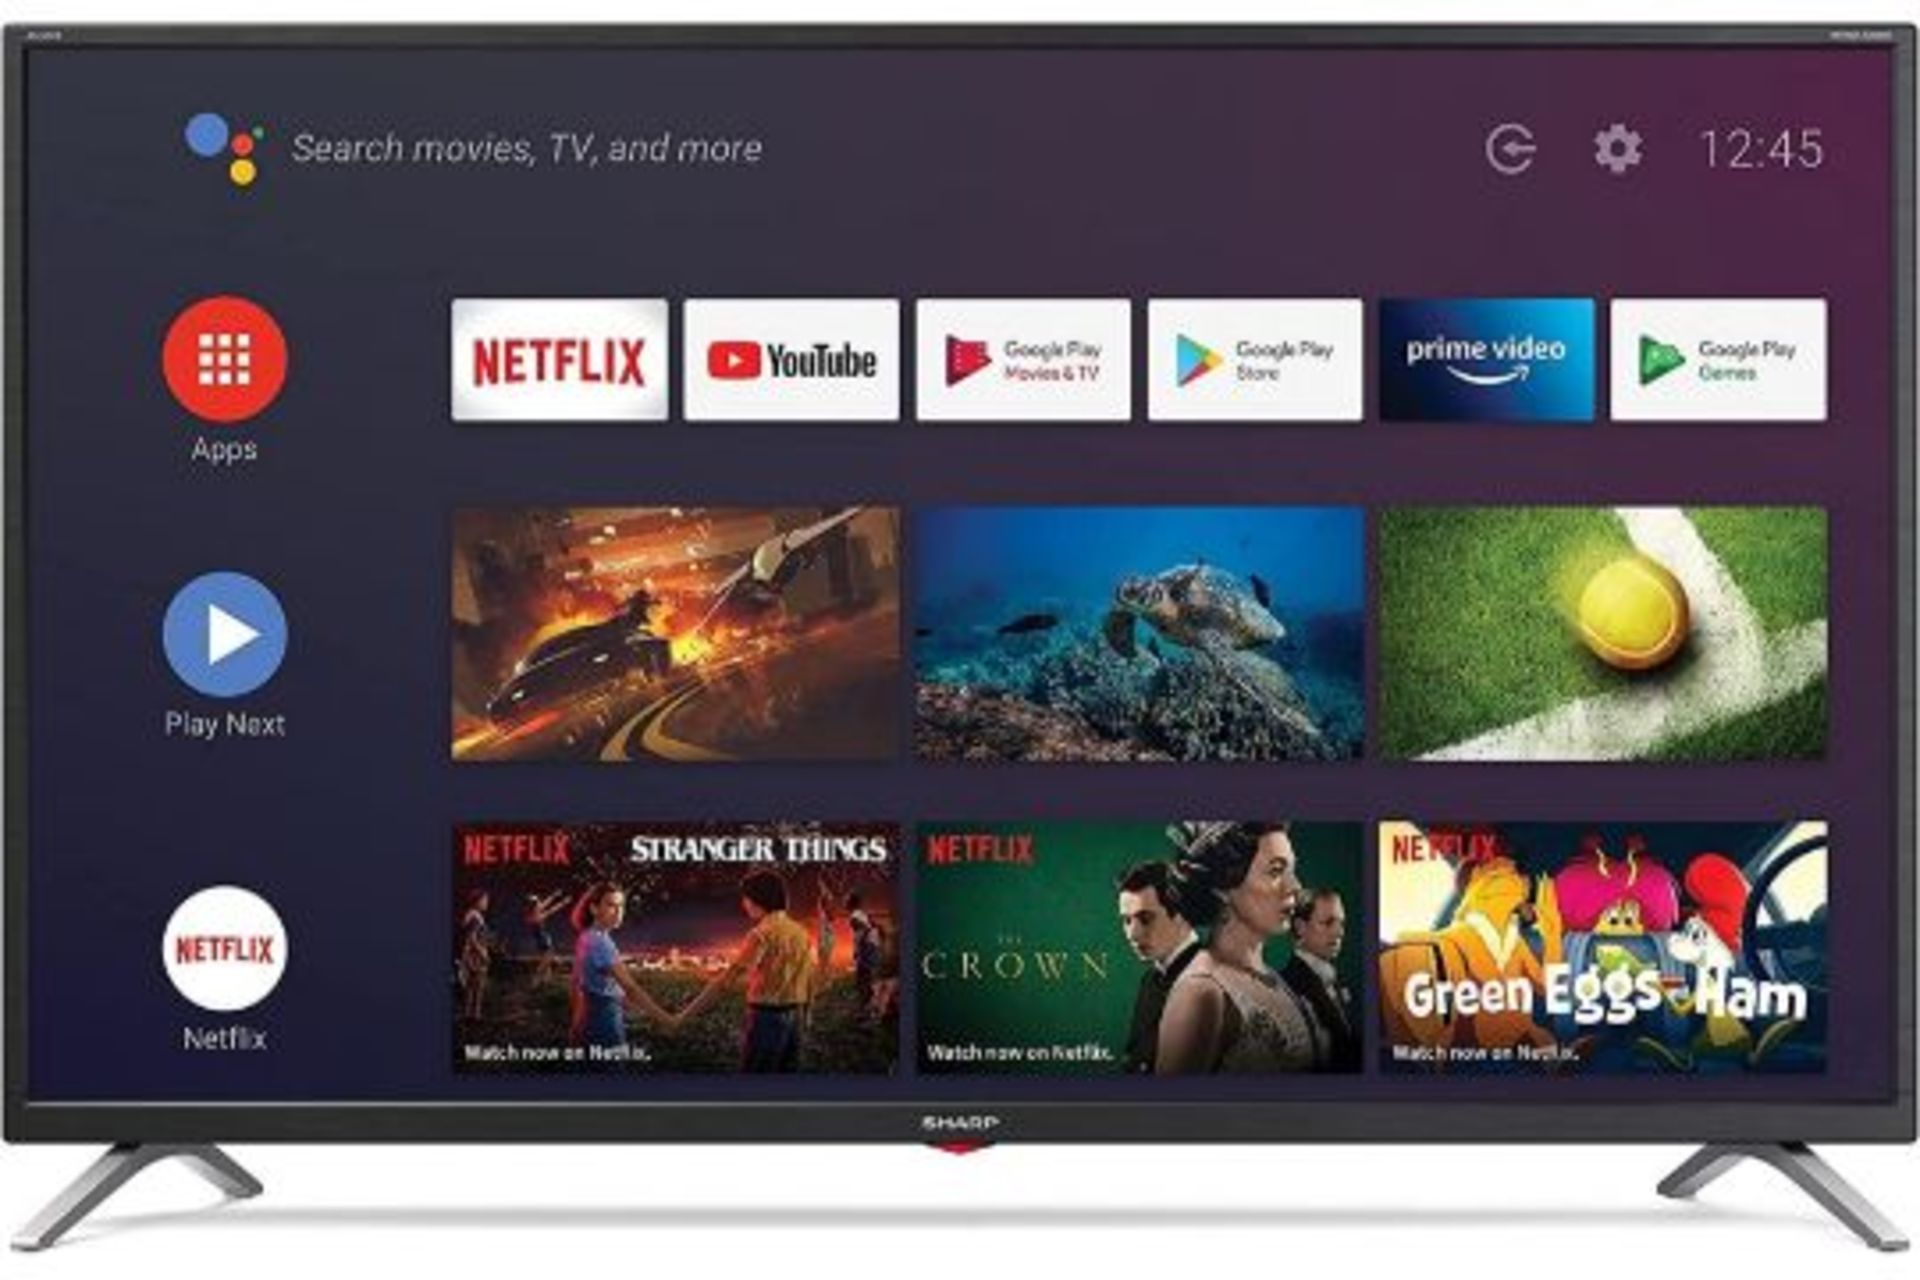 Brand new Sharp 42" FHD LED Smart Android TV Netflix Prime Freeview HD Chromecast built in Google